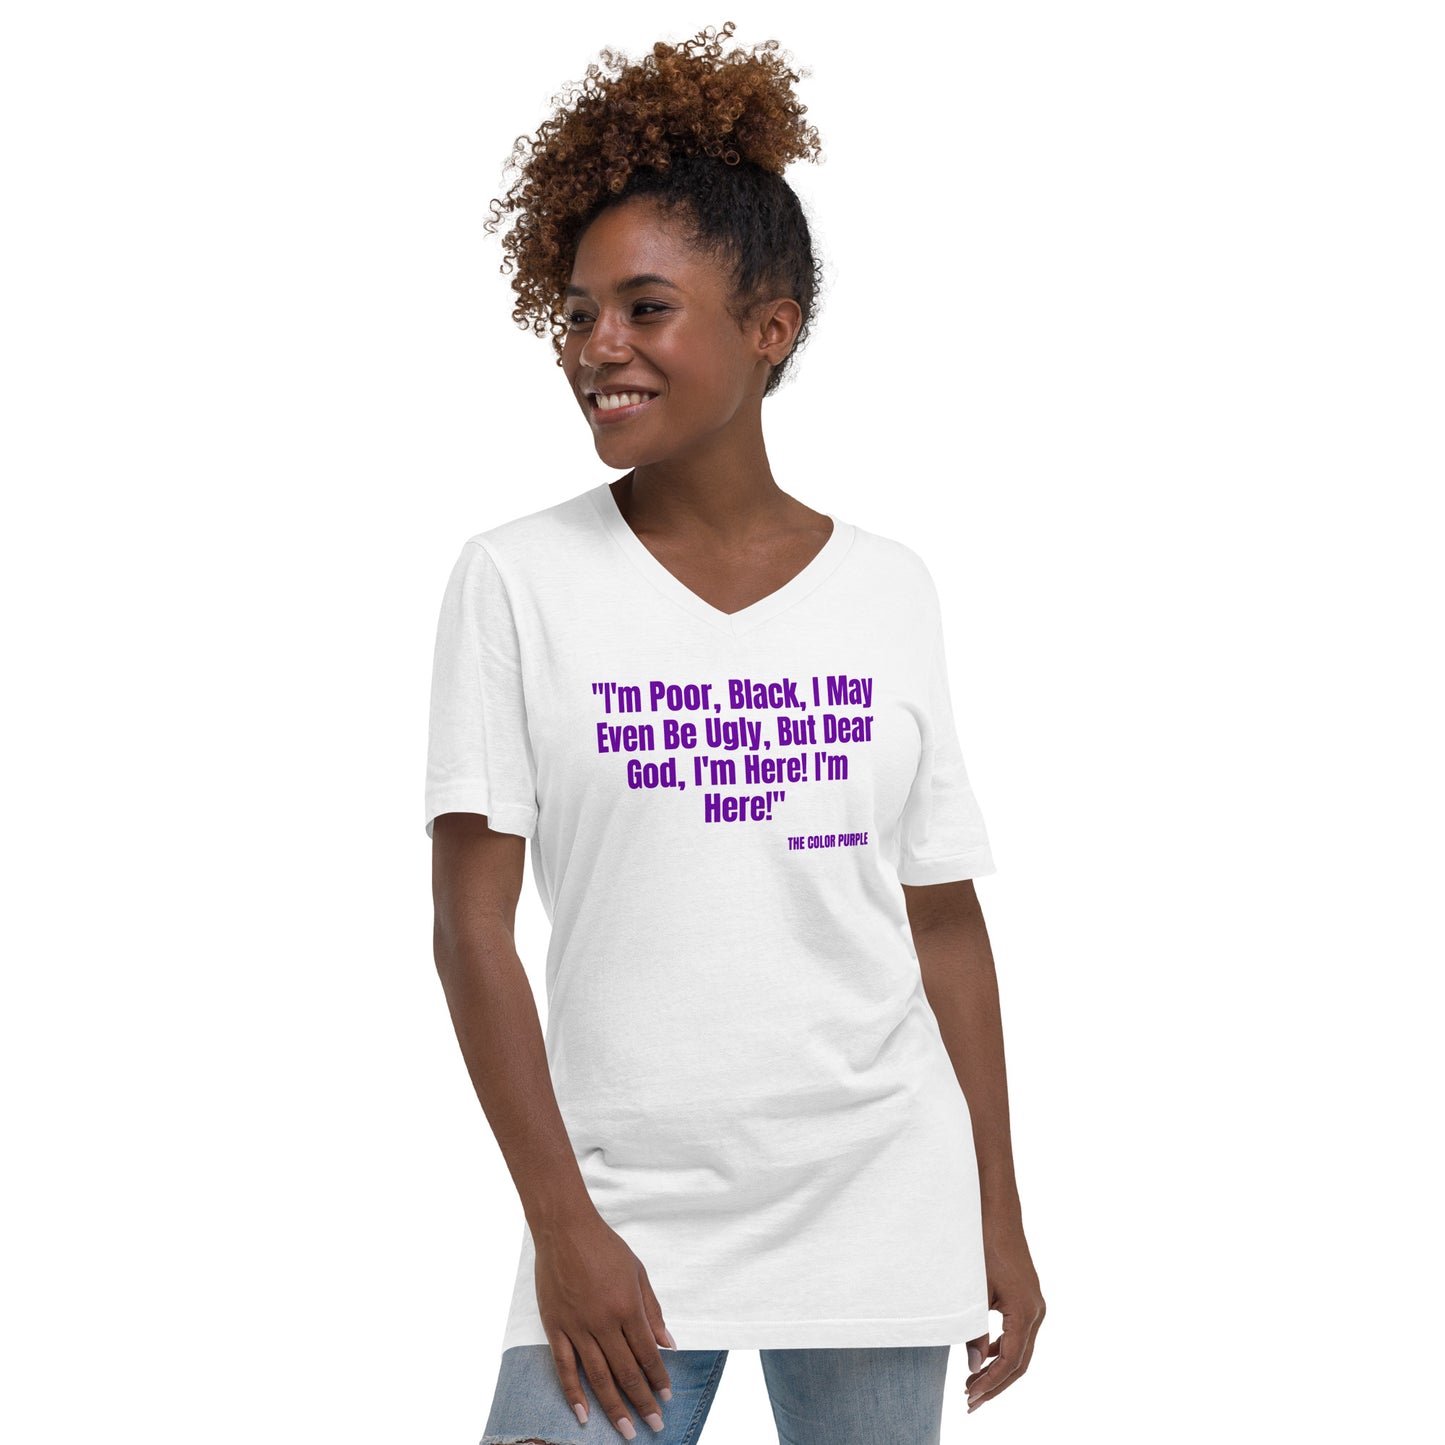 "I'm Poor..." The Color Purple Quote Unisex Short Sleeve V-Neck T-Shirt